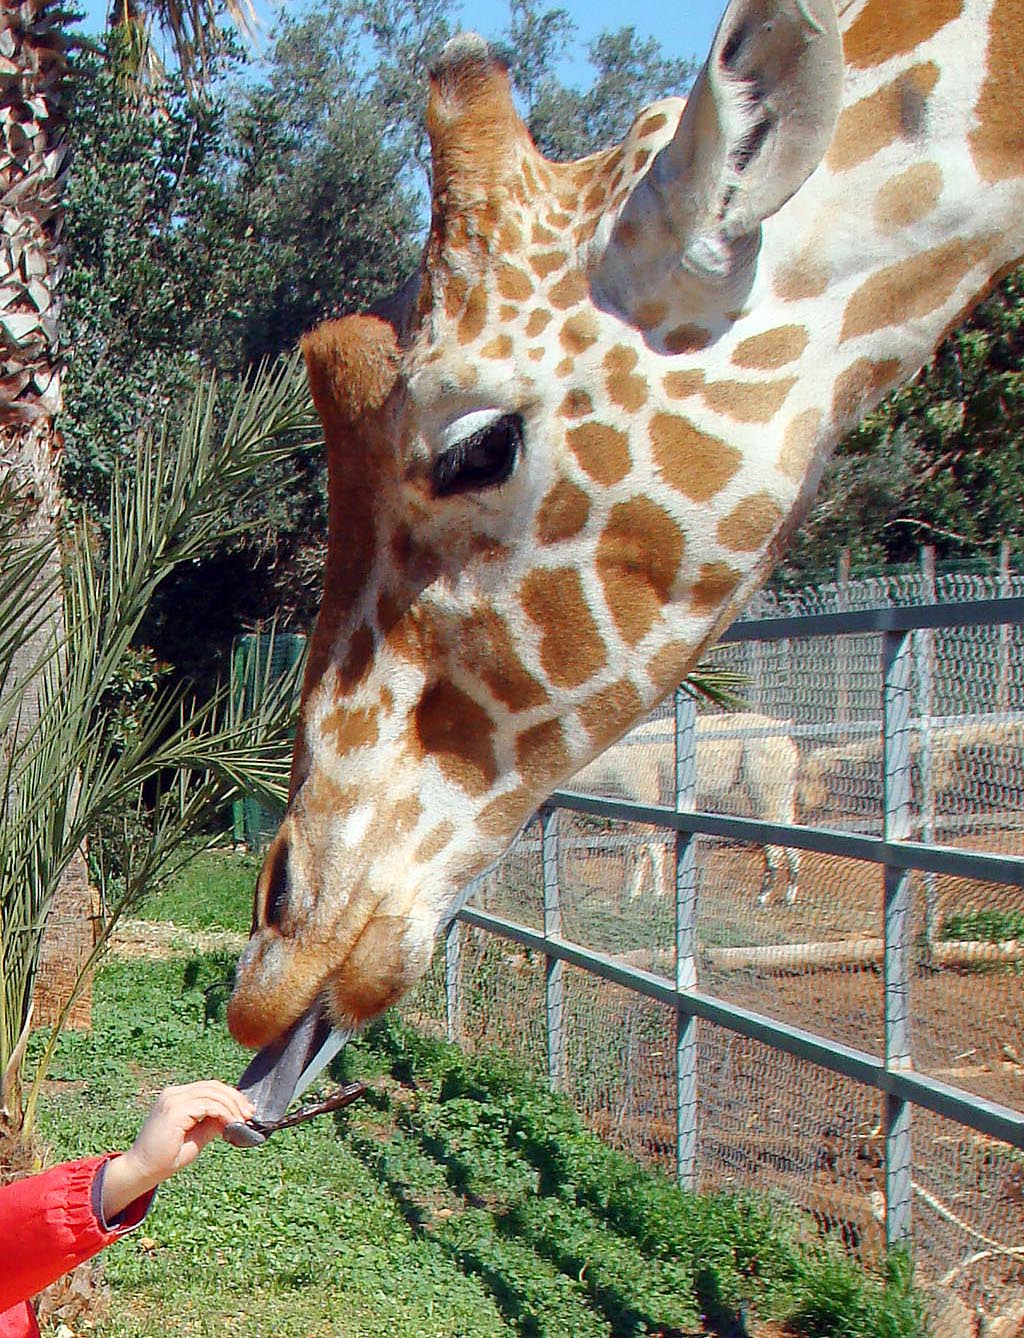 Pafos Zoo